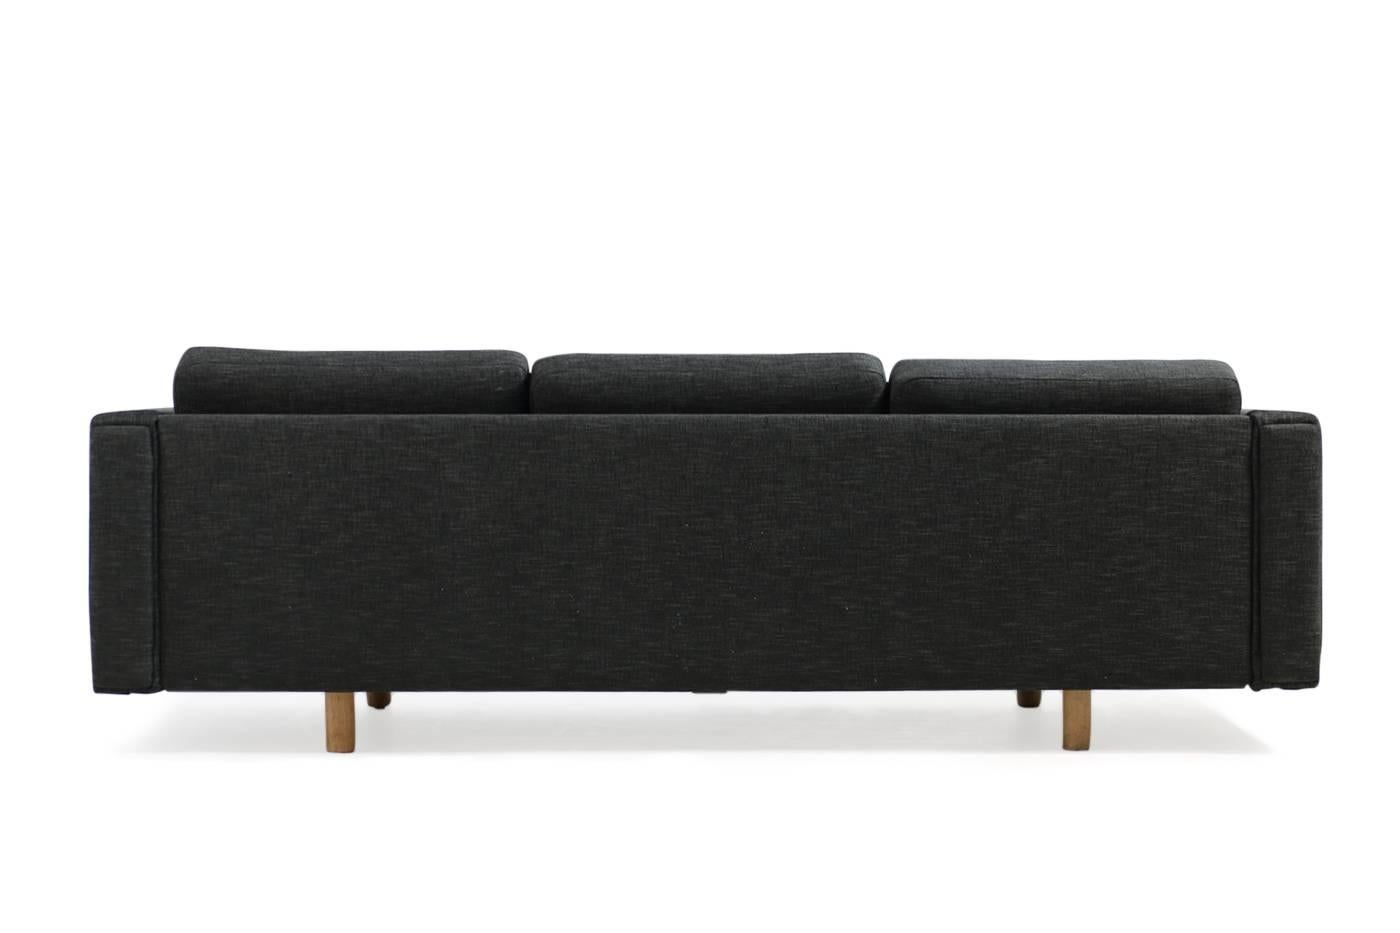 Beautiful Hans J. Wegner Sofa, early edition, oak legs, innerspring cushions with new upholstery, high quality cotton linen fabric, black/dark grey/dark brown woven fabric, freestanding. Best condition.
 